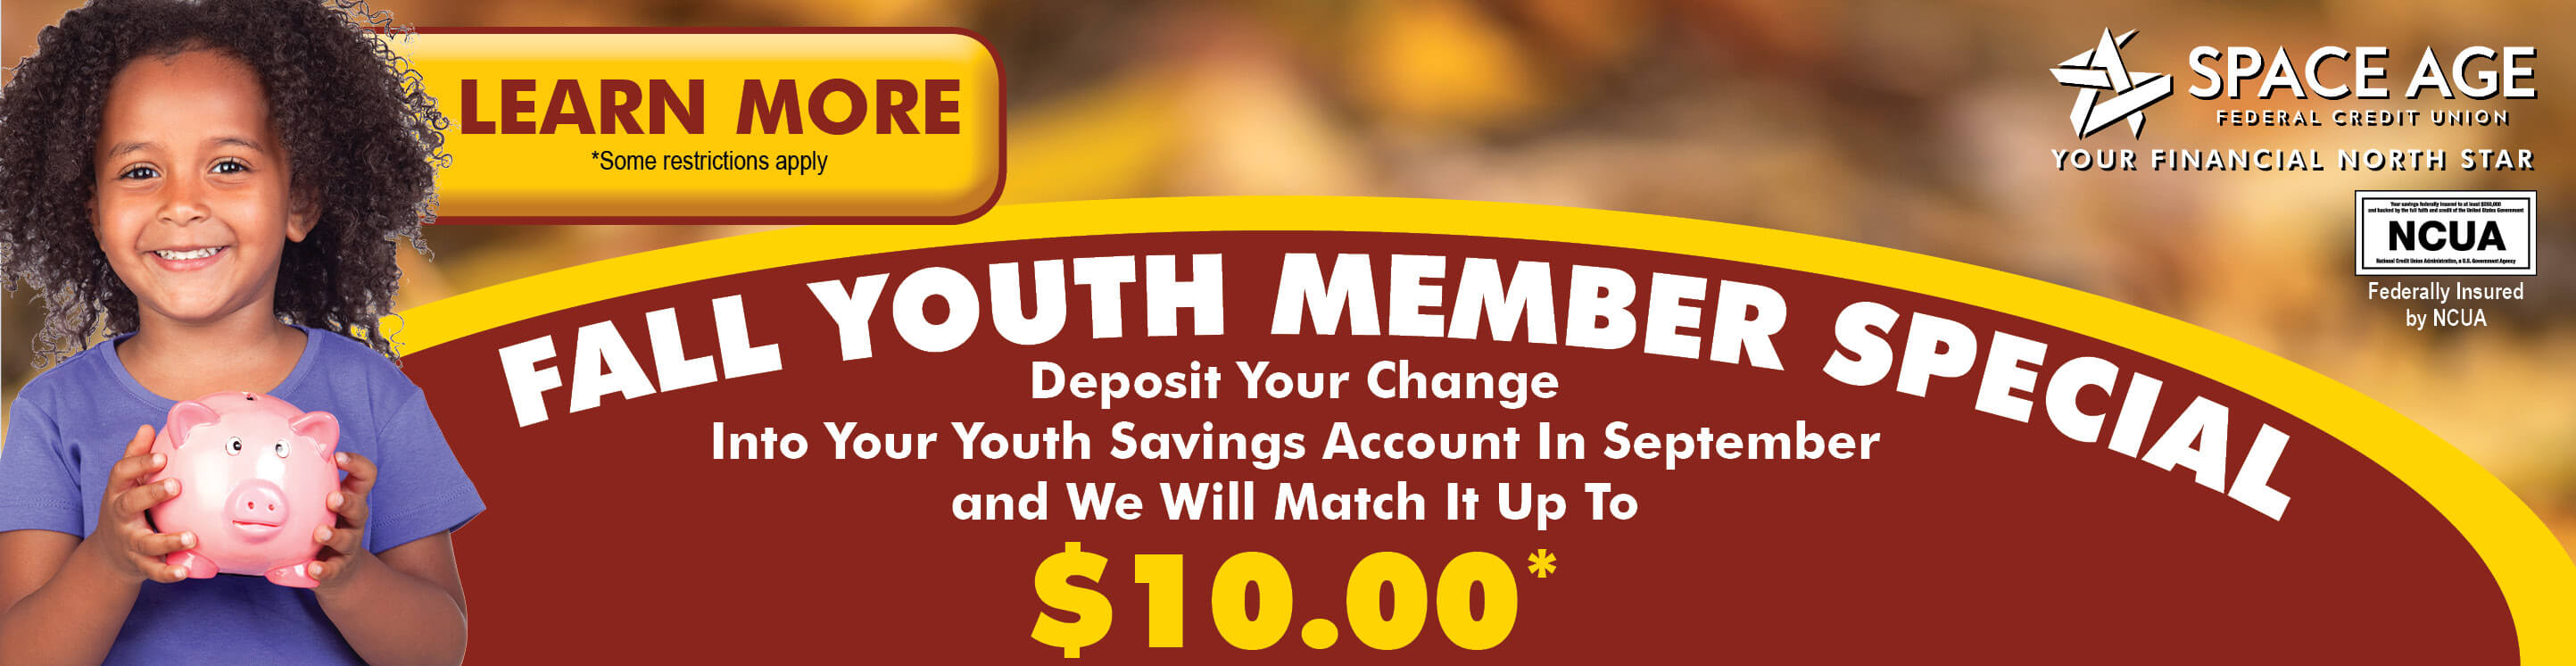 Visit the Youth Member Match Webpage to Learn more and start your kids saving money!